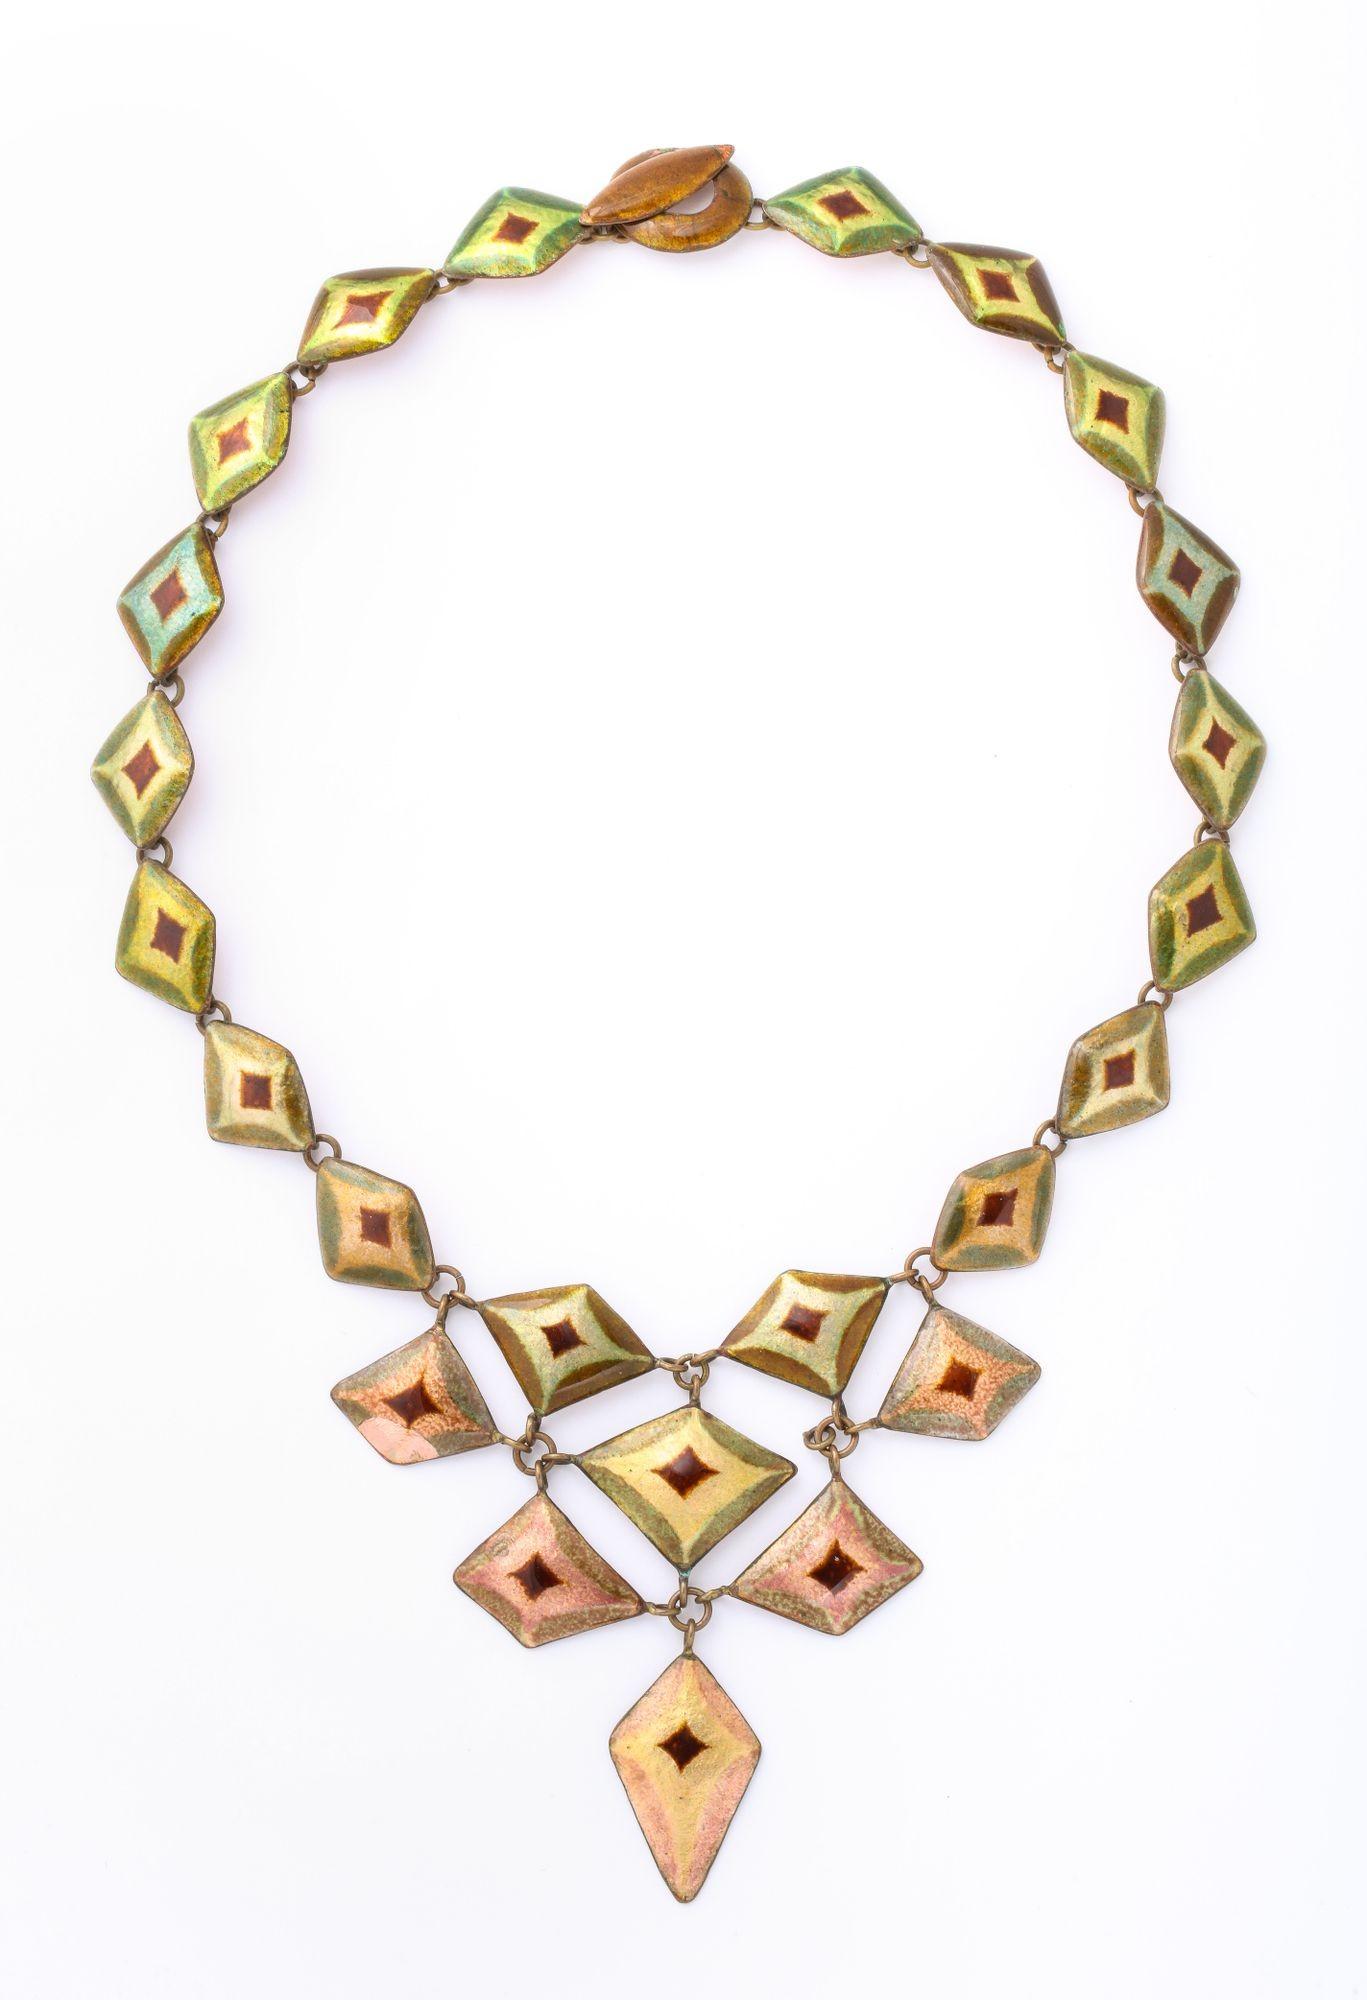 A period French enamel over copper necklace with diamond pattern geometrical decoration signed by Jewelry desiigner Loutzia.


Loutzia is the name and brand of a Parisian enamel workshop, contraction of the names of its two founders, Marie-Louise